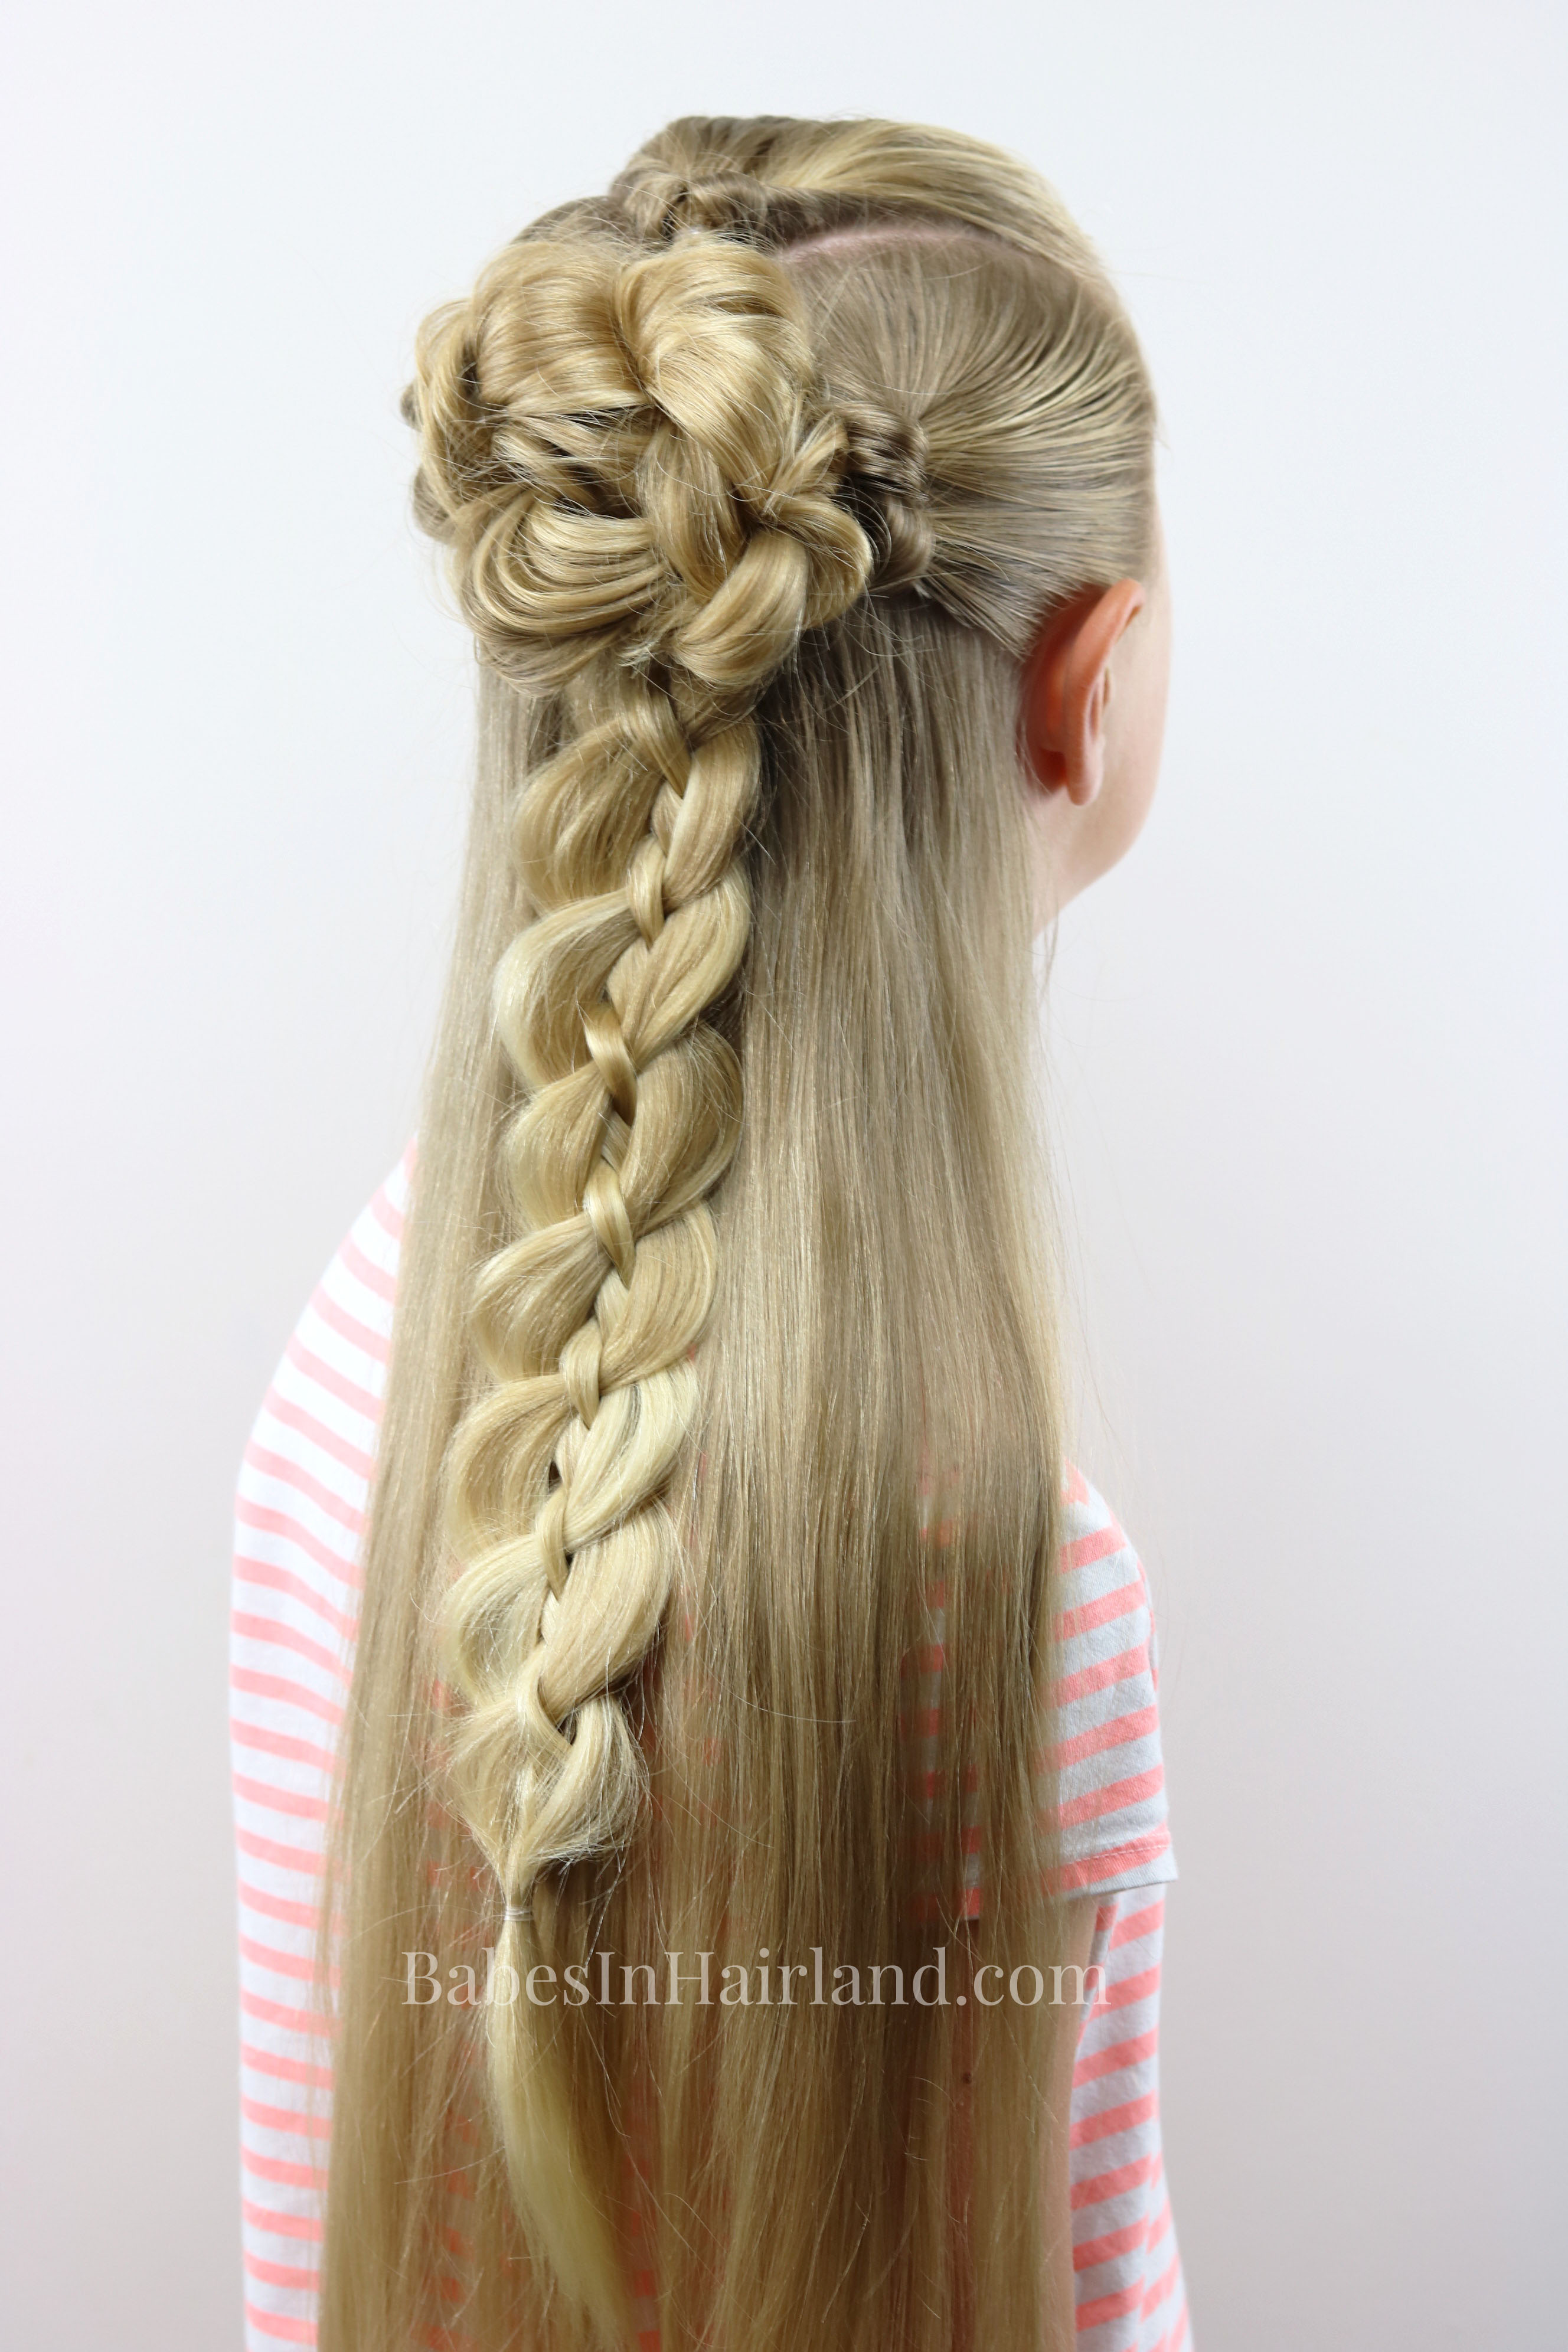 Braid Knot Half Up Combo Back To School Hairstyle